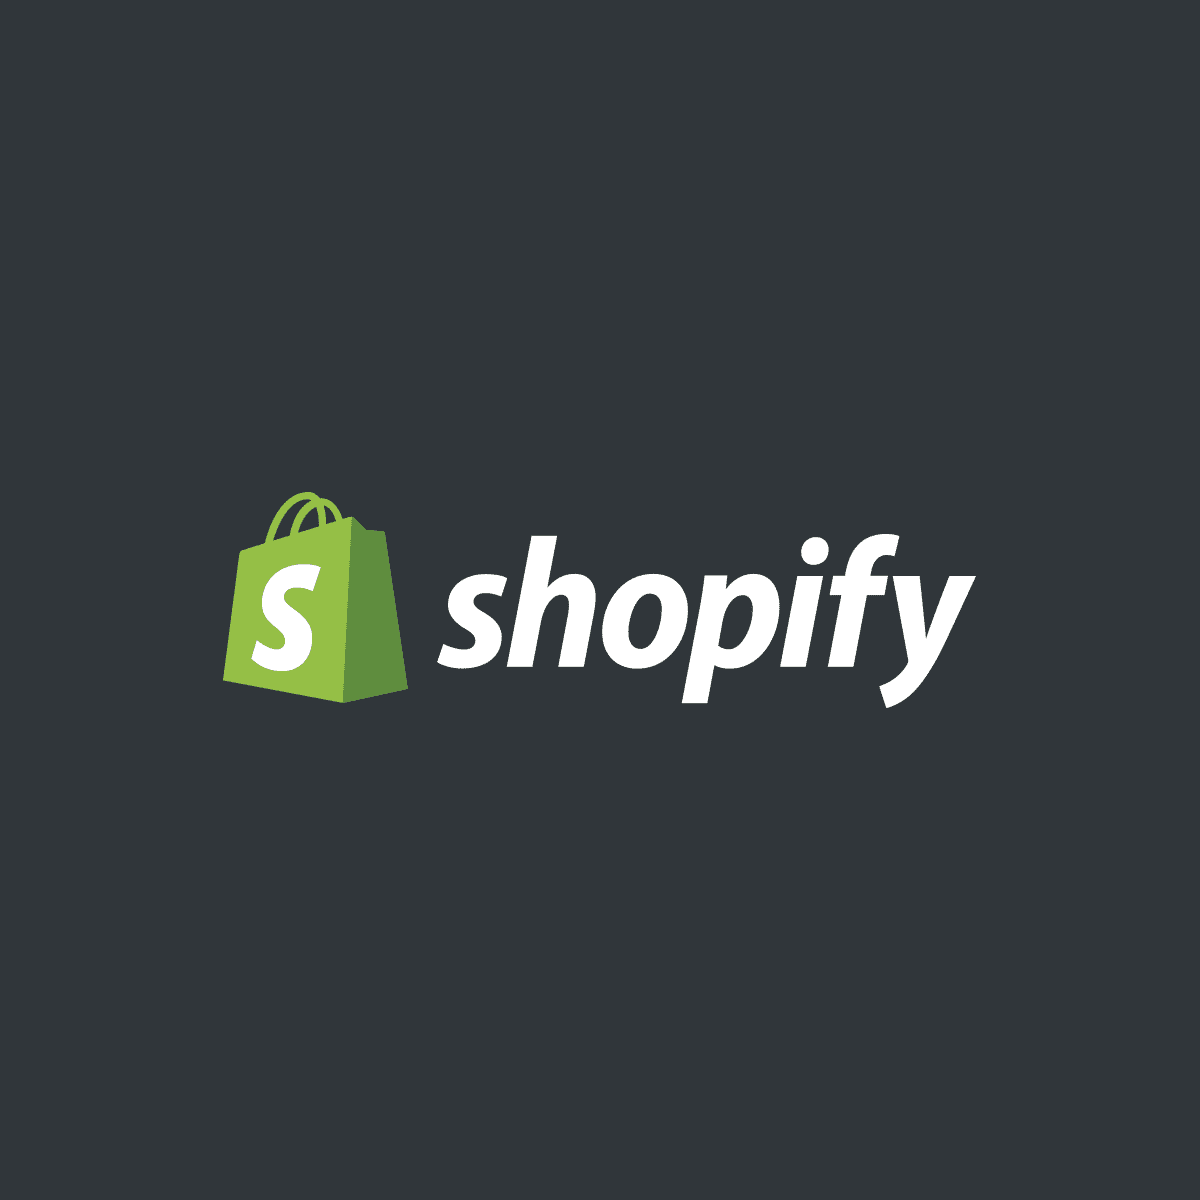 API for Scraping Products on Shopify